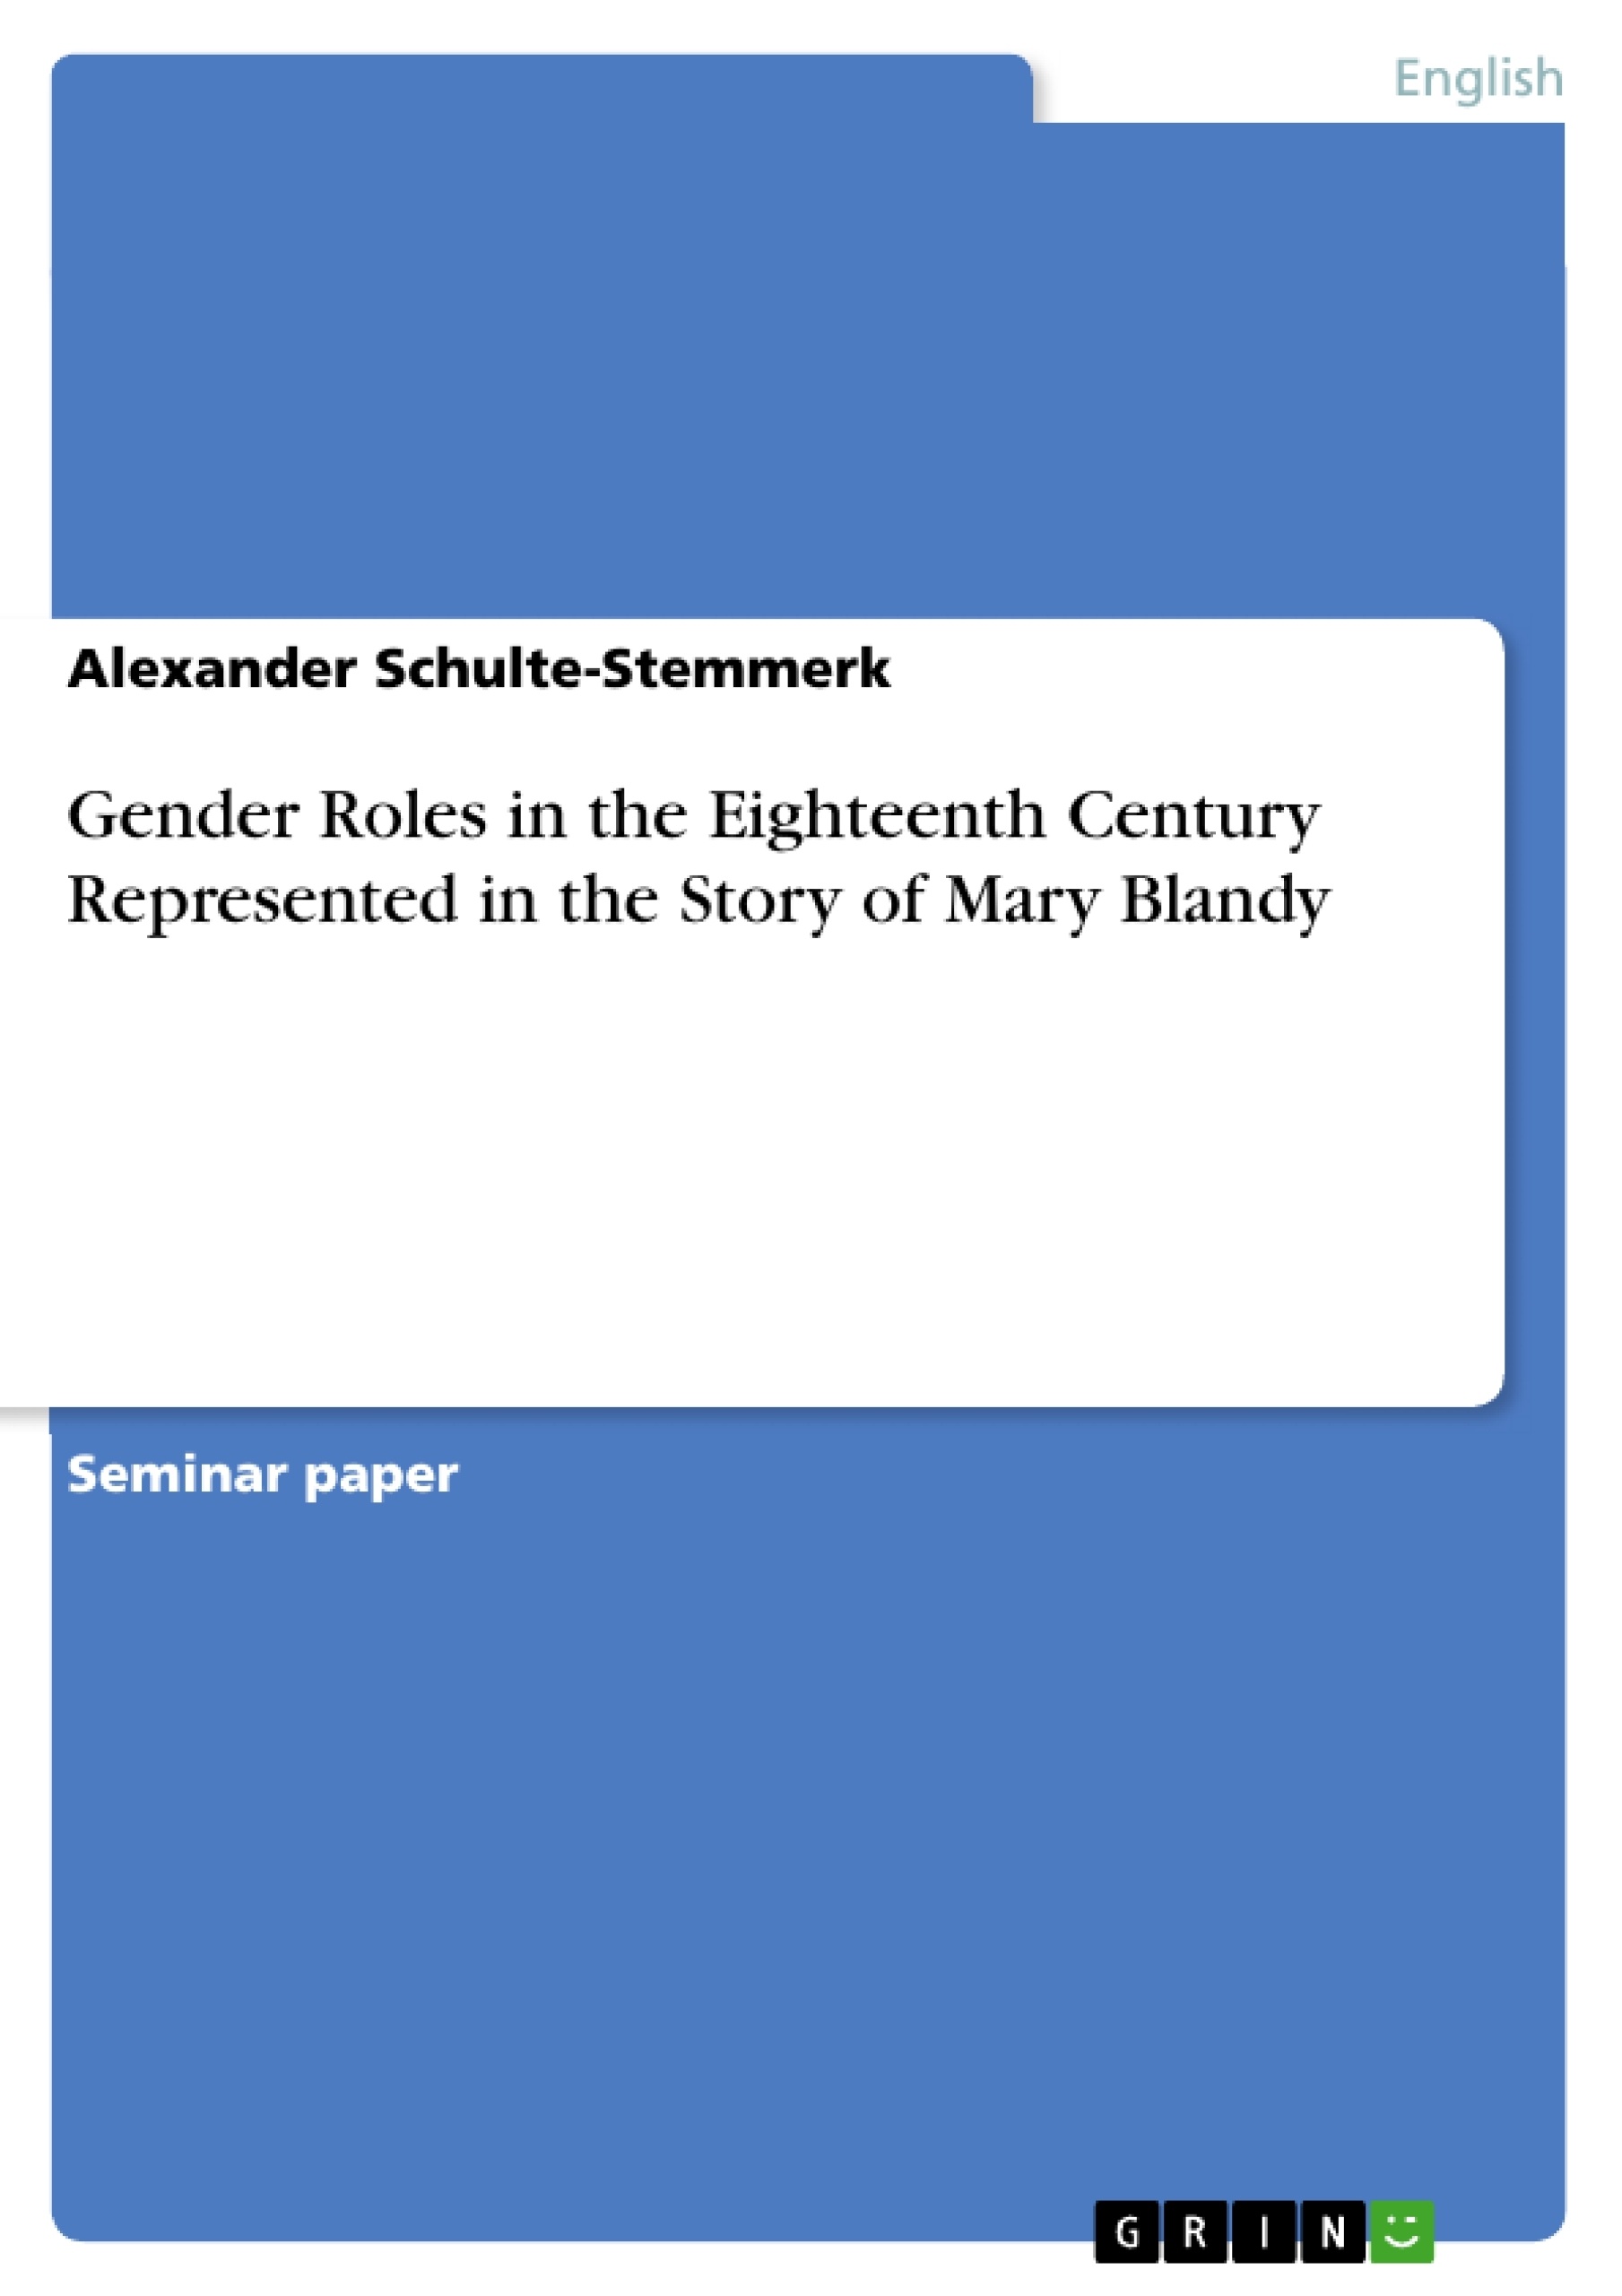 Título: Gender Roles in the Eighteenth Century Represented in the Story of Mary Blandy